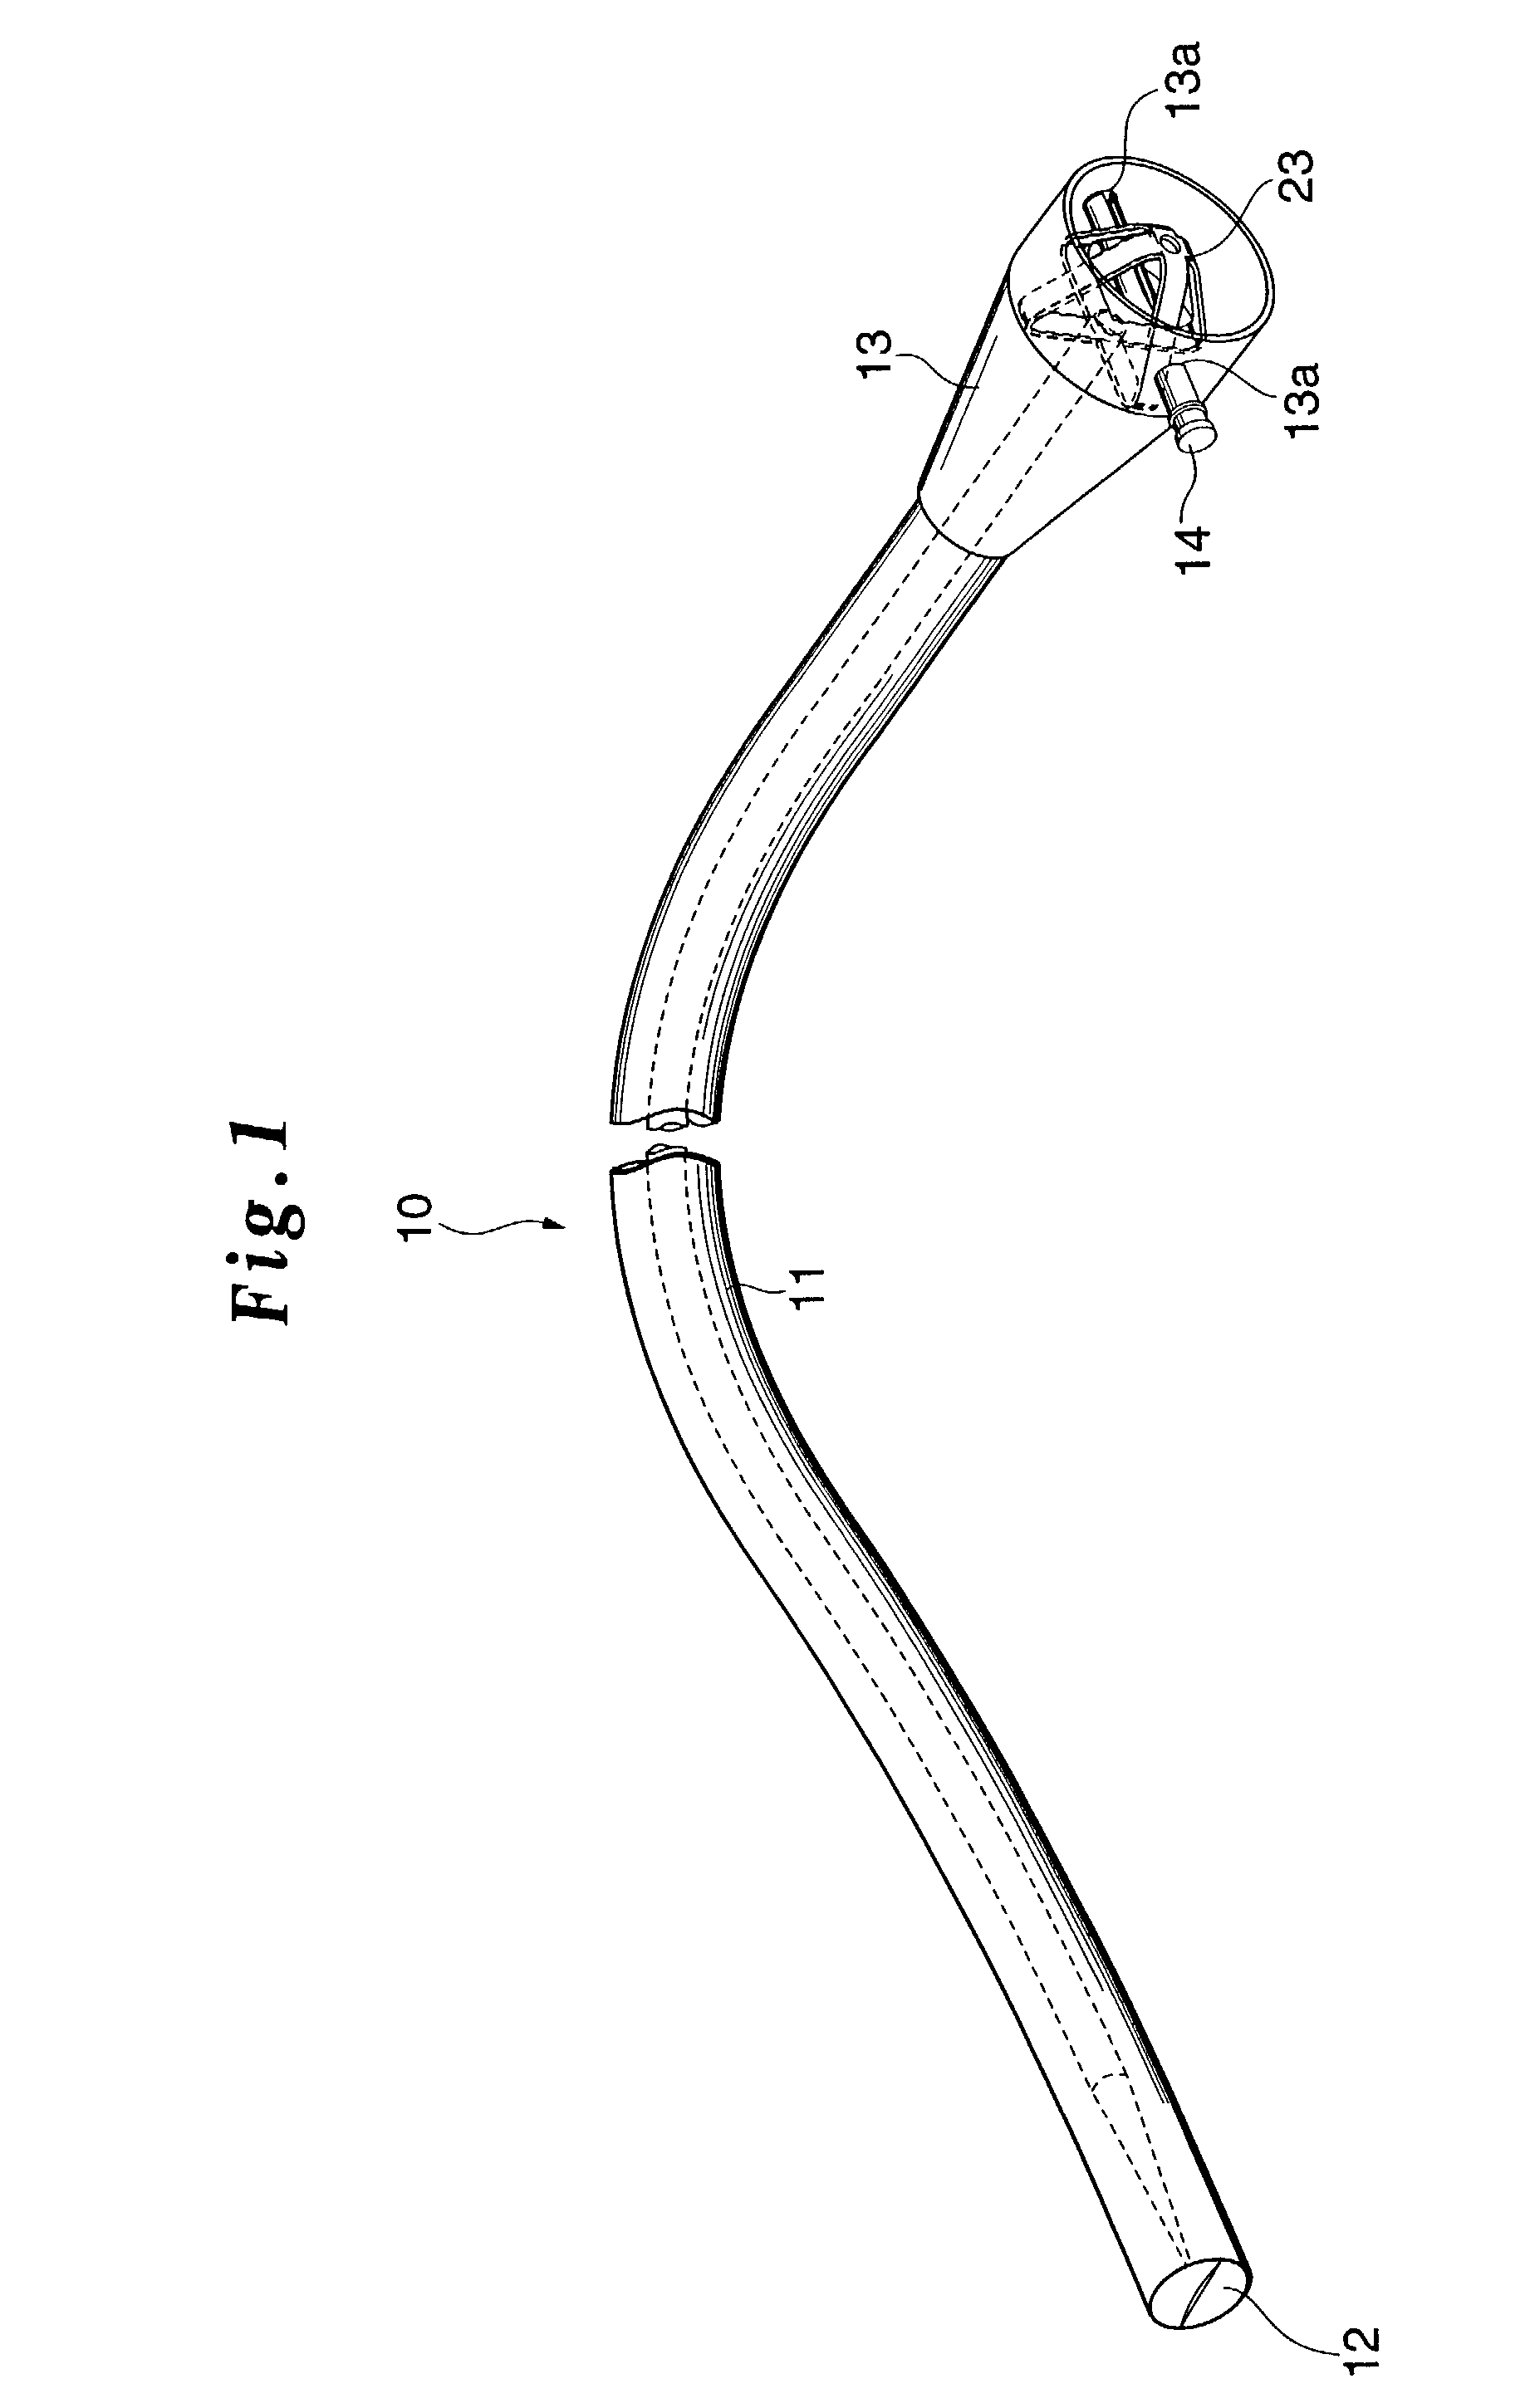 Method of gastrostomy, and an infection preventive cover, or catheter kit, and a gastrostomy catheter